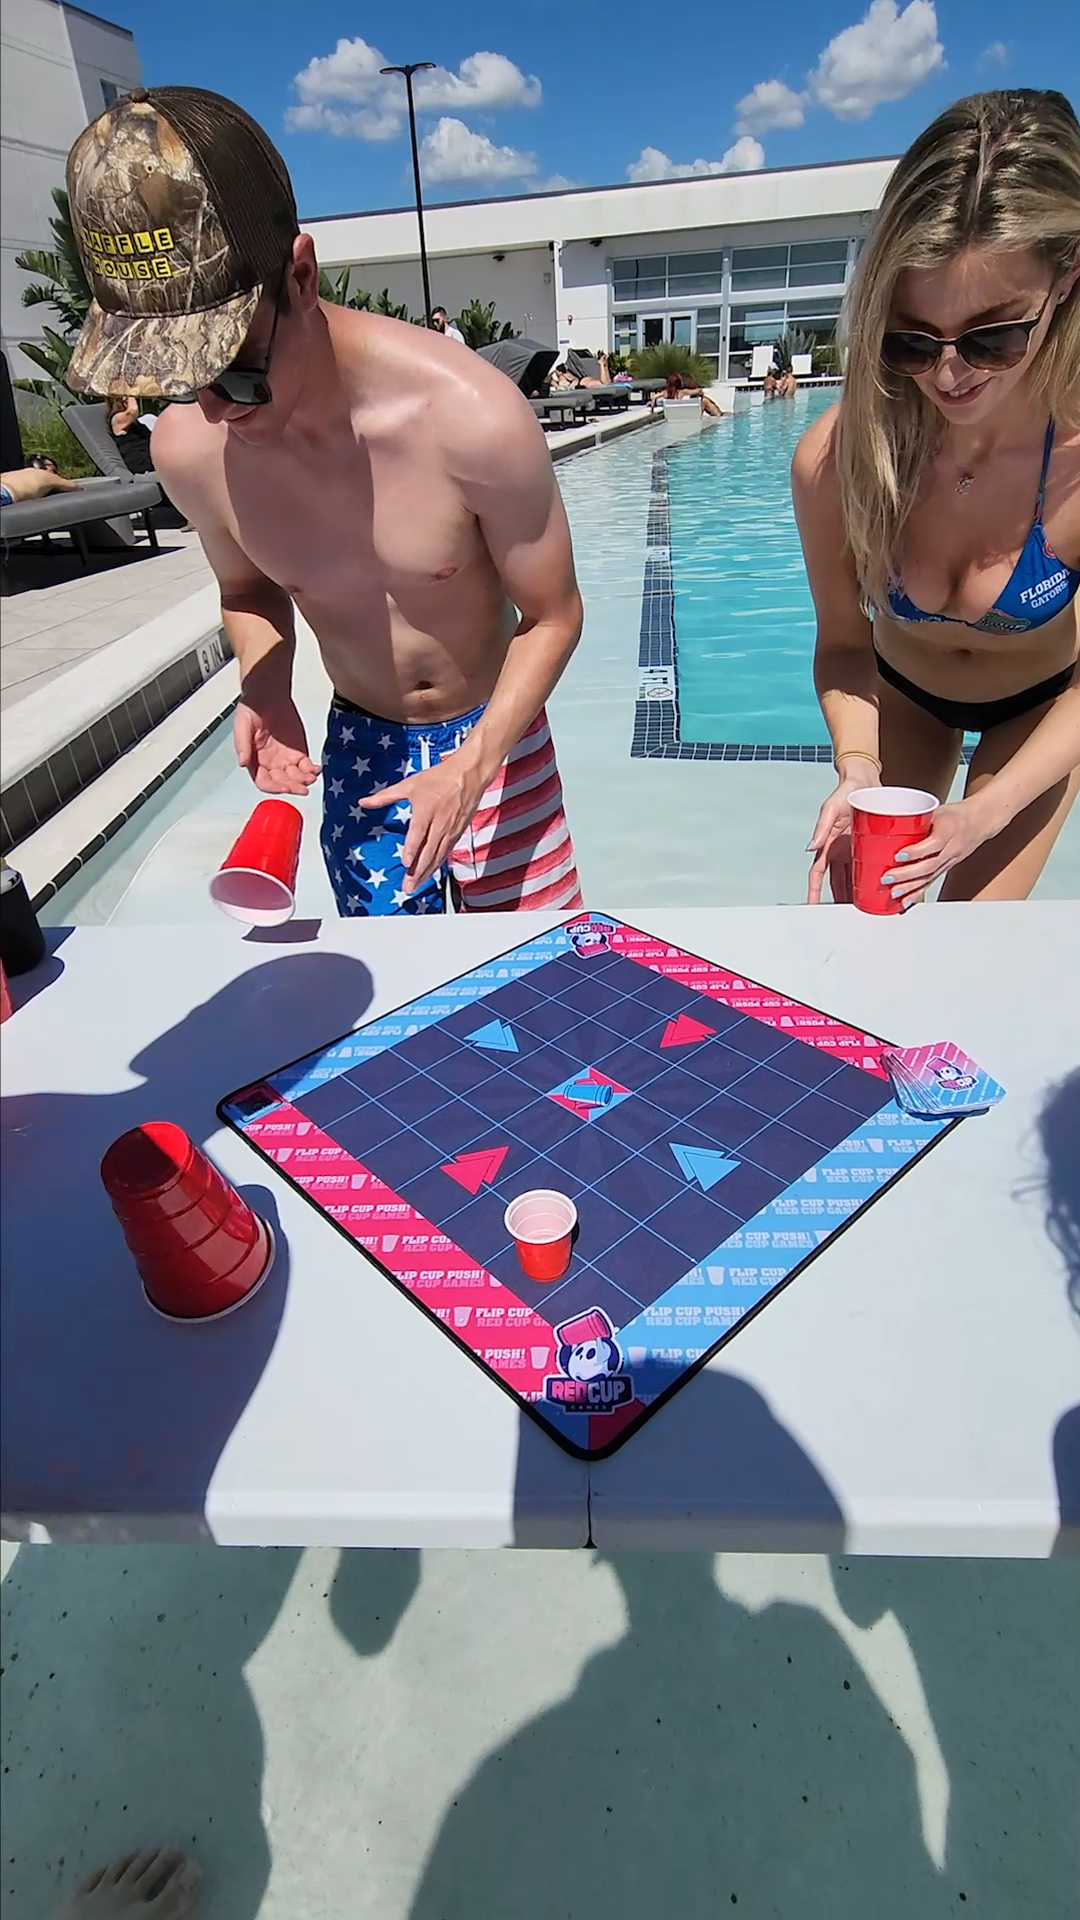 Best Drinking Games: FLIP CUP PUSH! Flip Cup made even better.